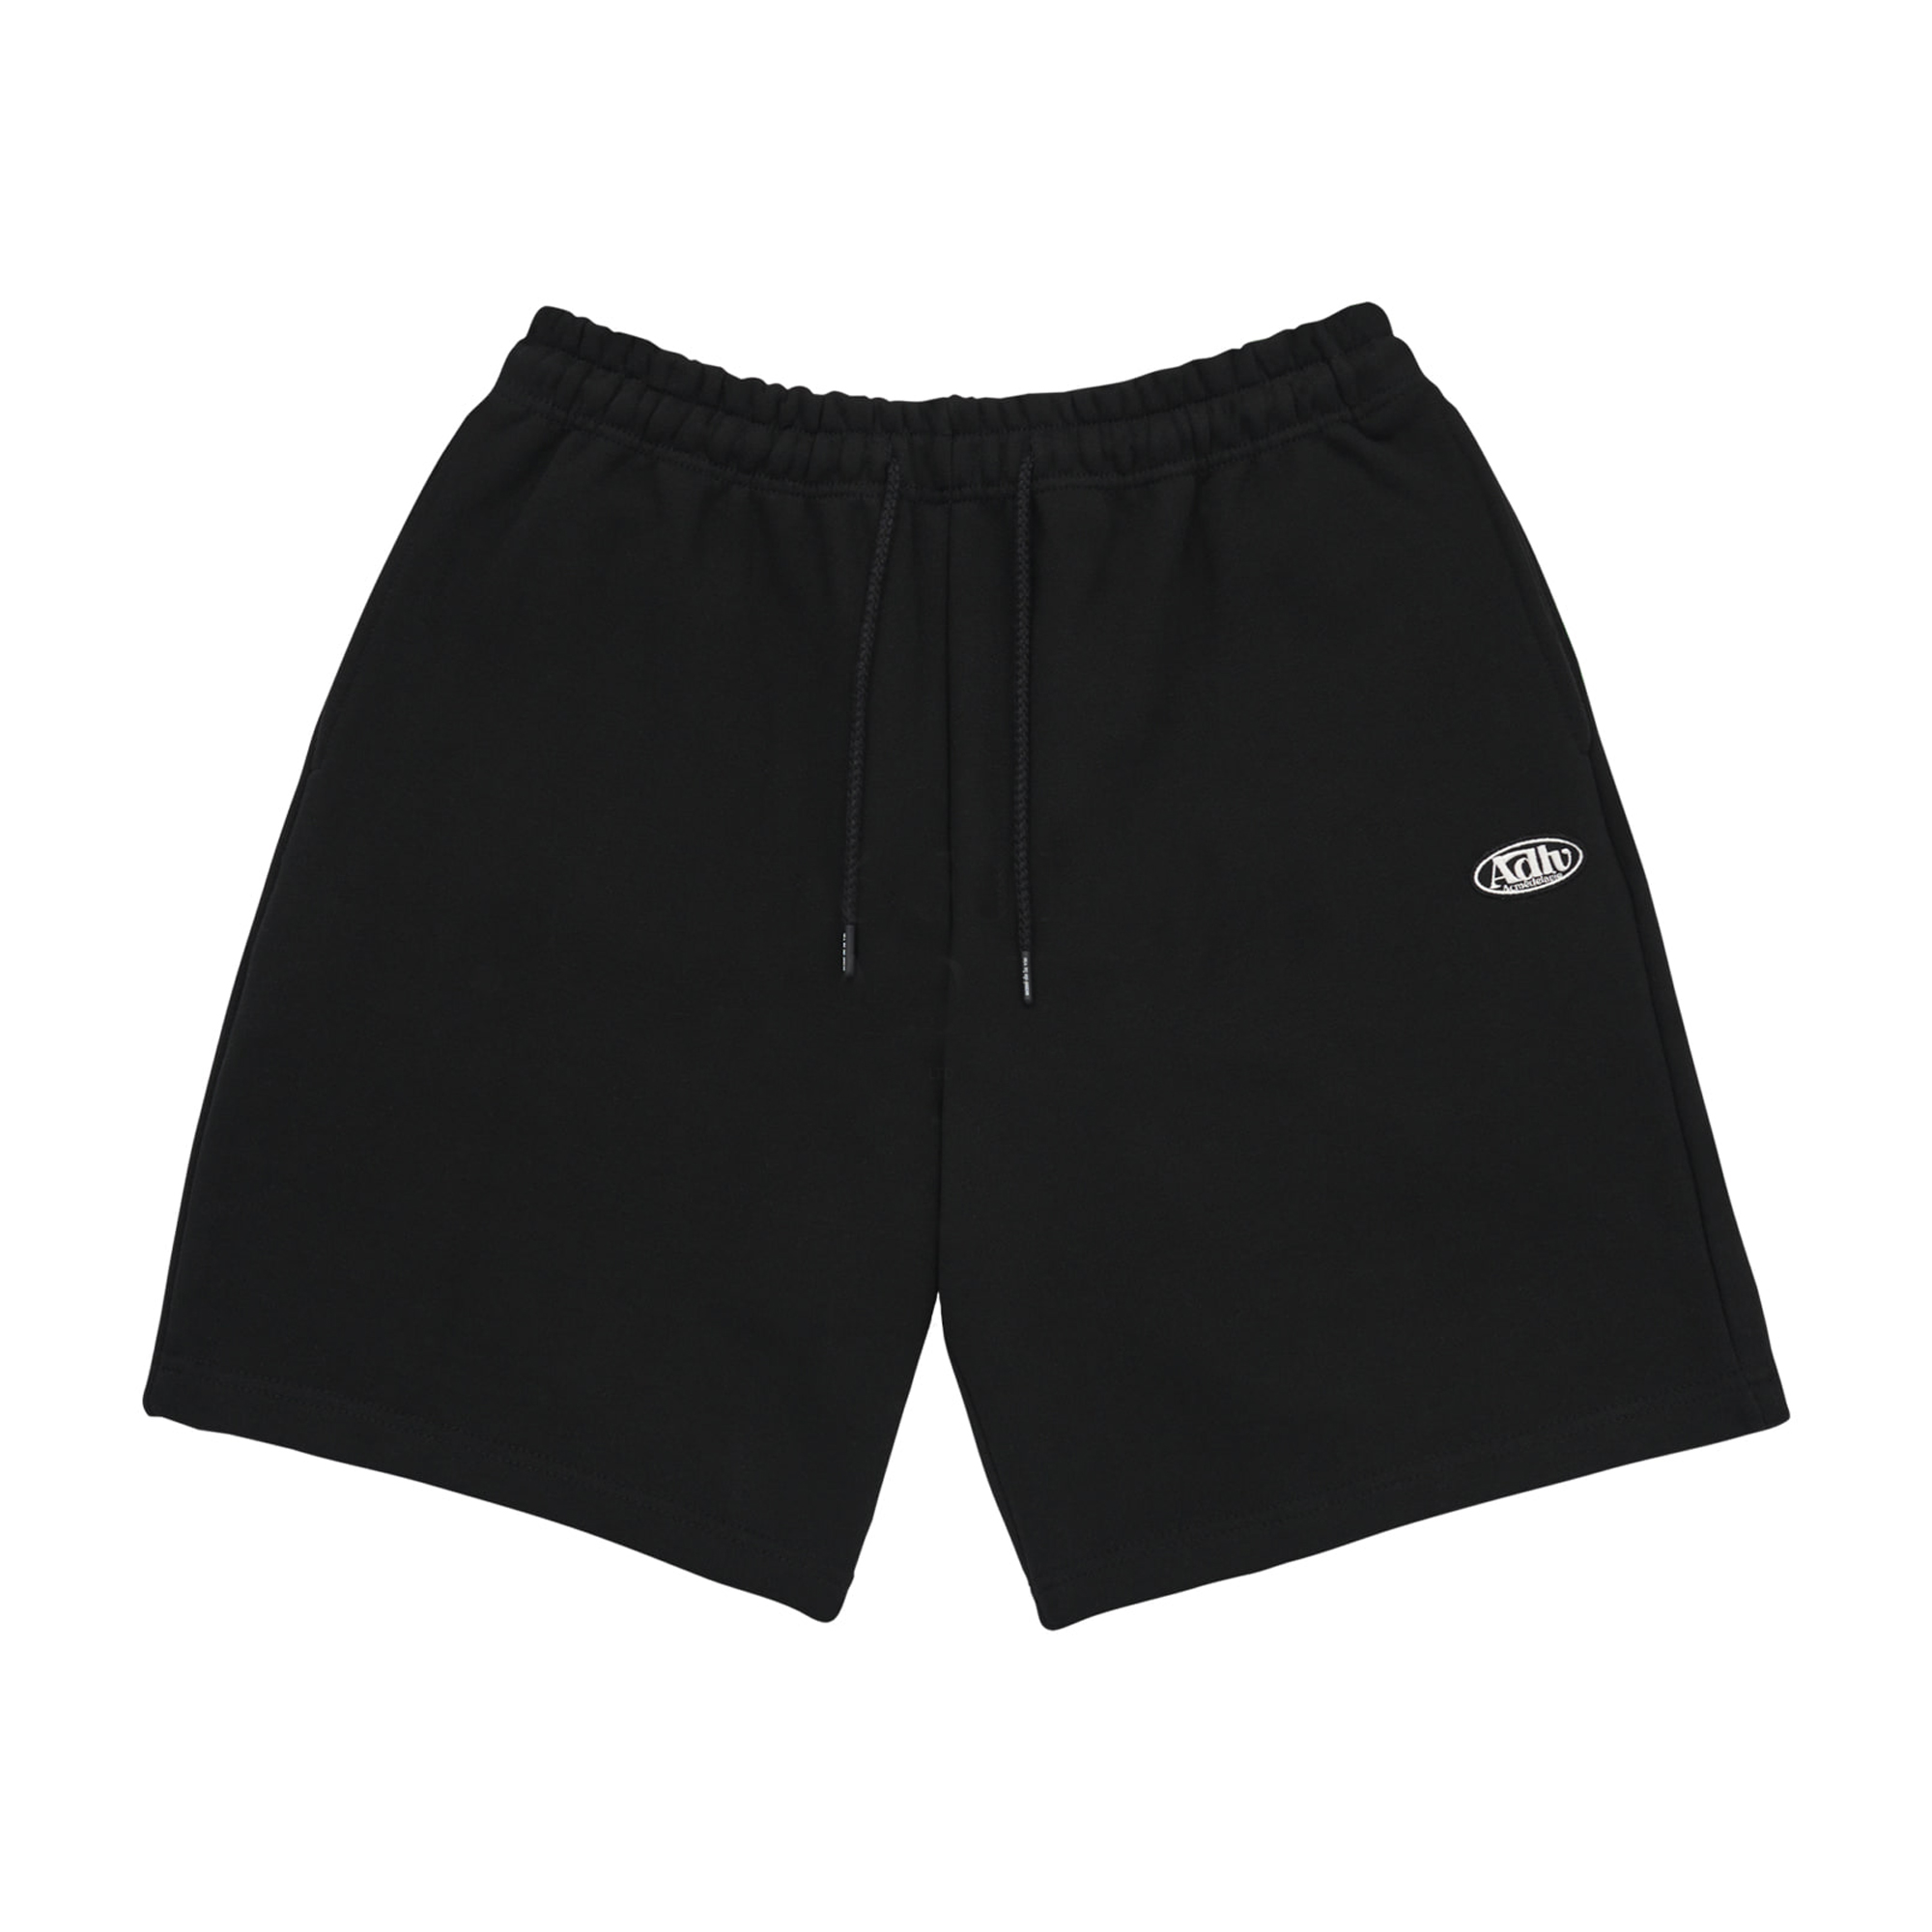 Adlv X Lisa Circle Wappen Training Shorts - Well Bred Store